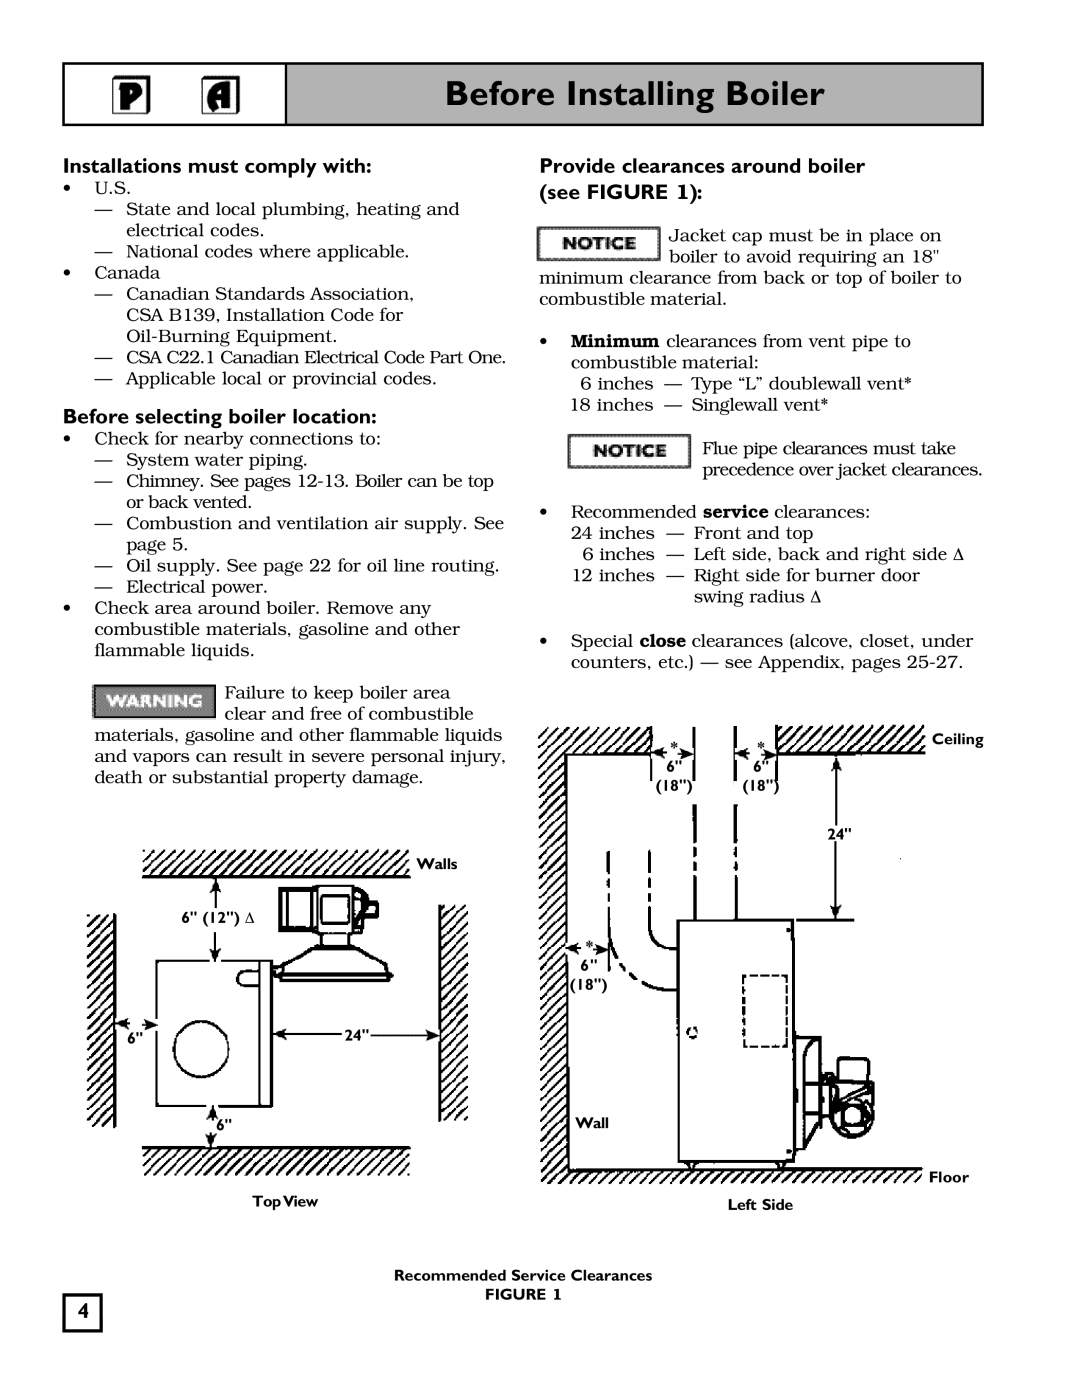 Weil-McLain 550-141-826/1201 Before Installing Boiler, Installations must comply with, Before selecting boiler location 